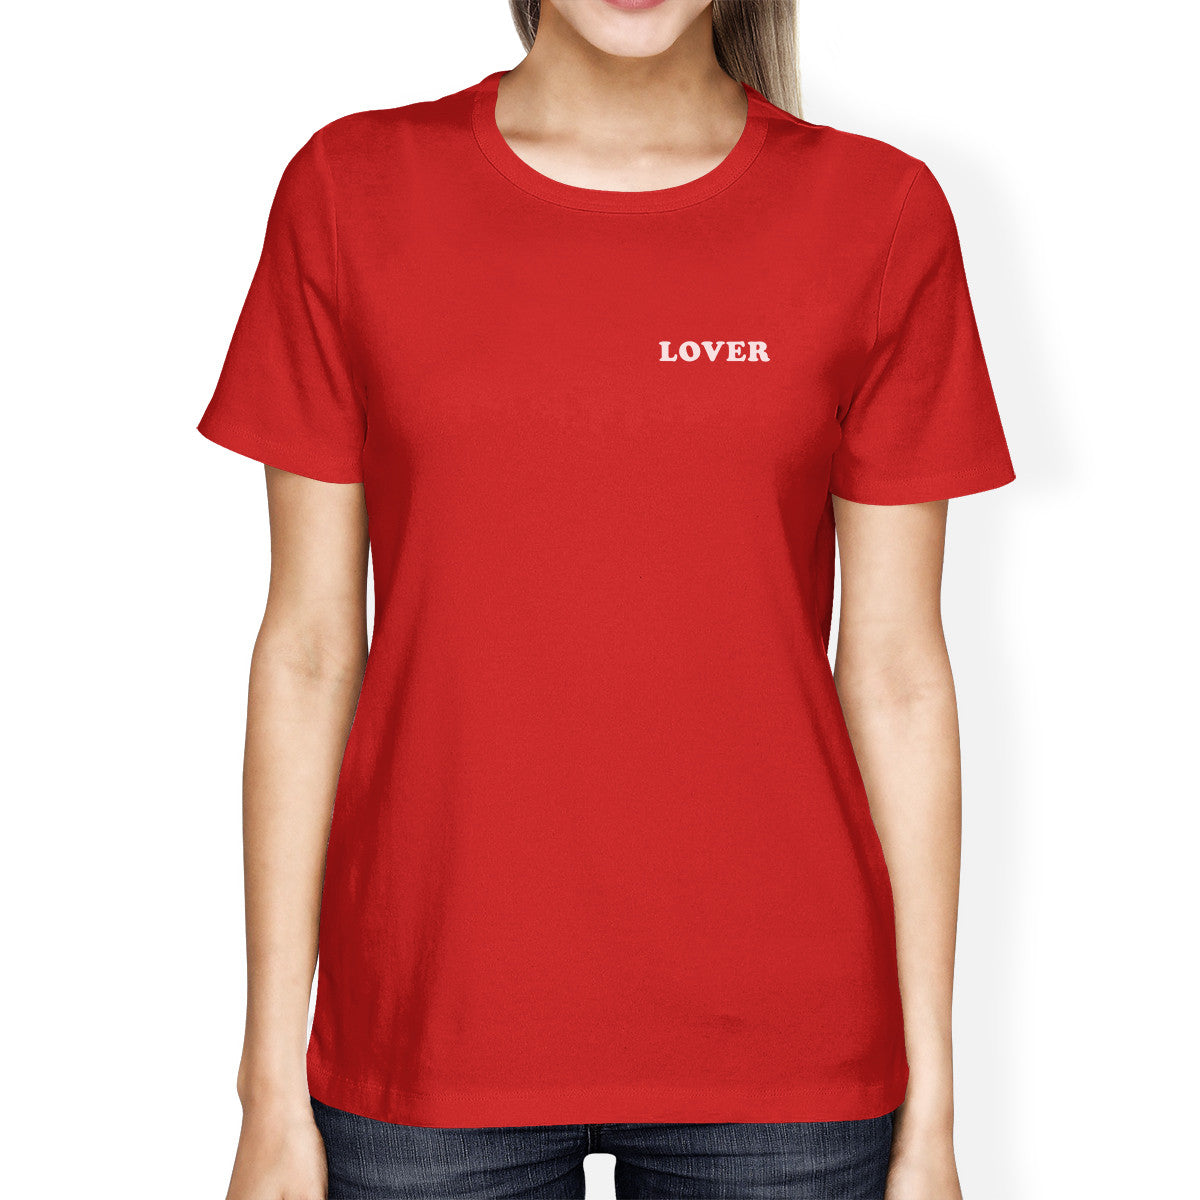 red pony t shirt